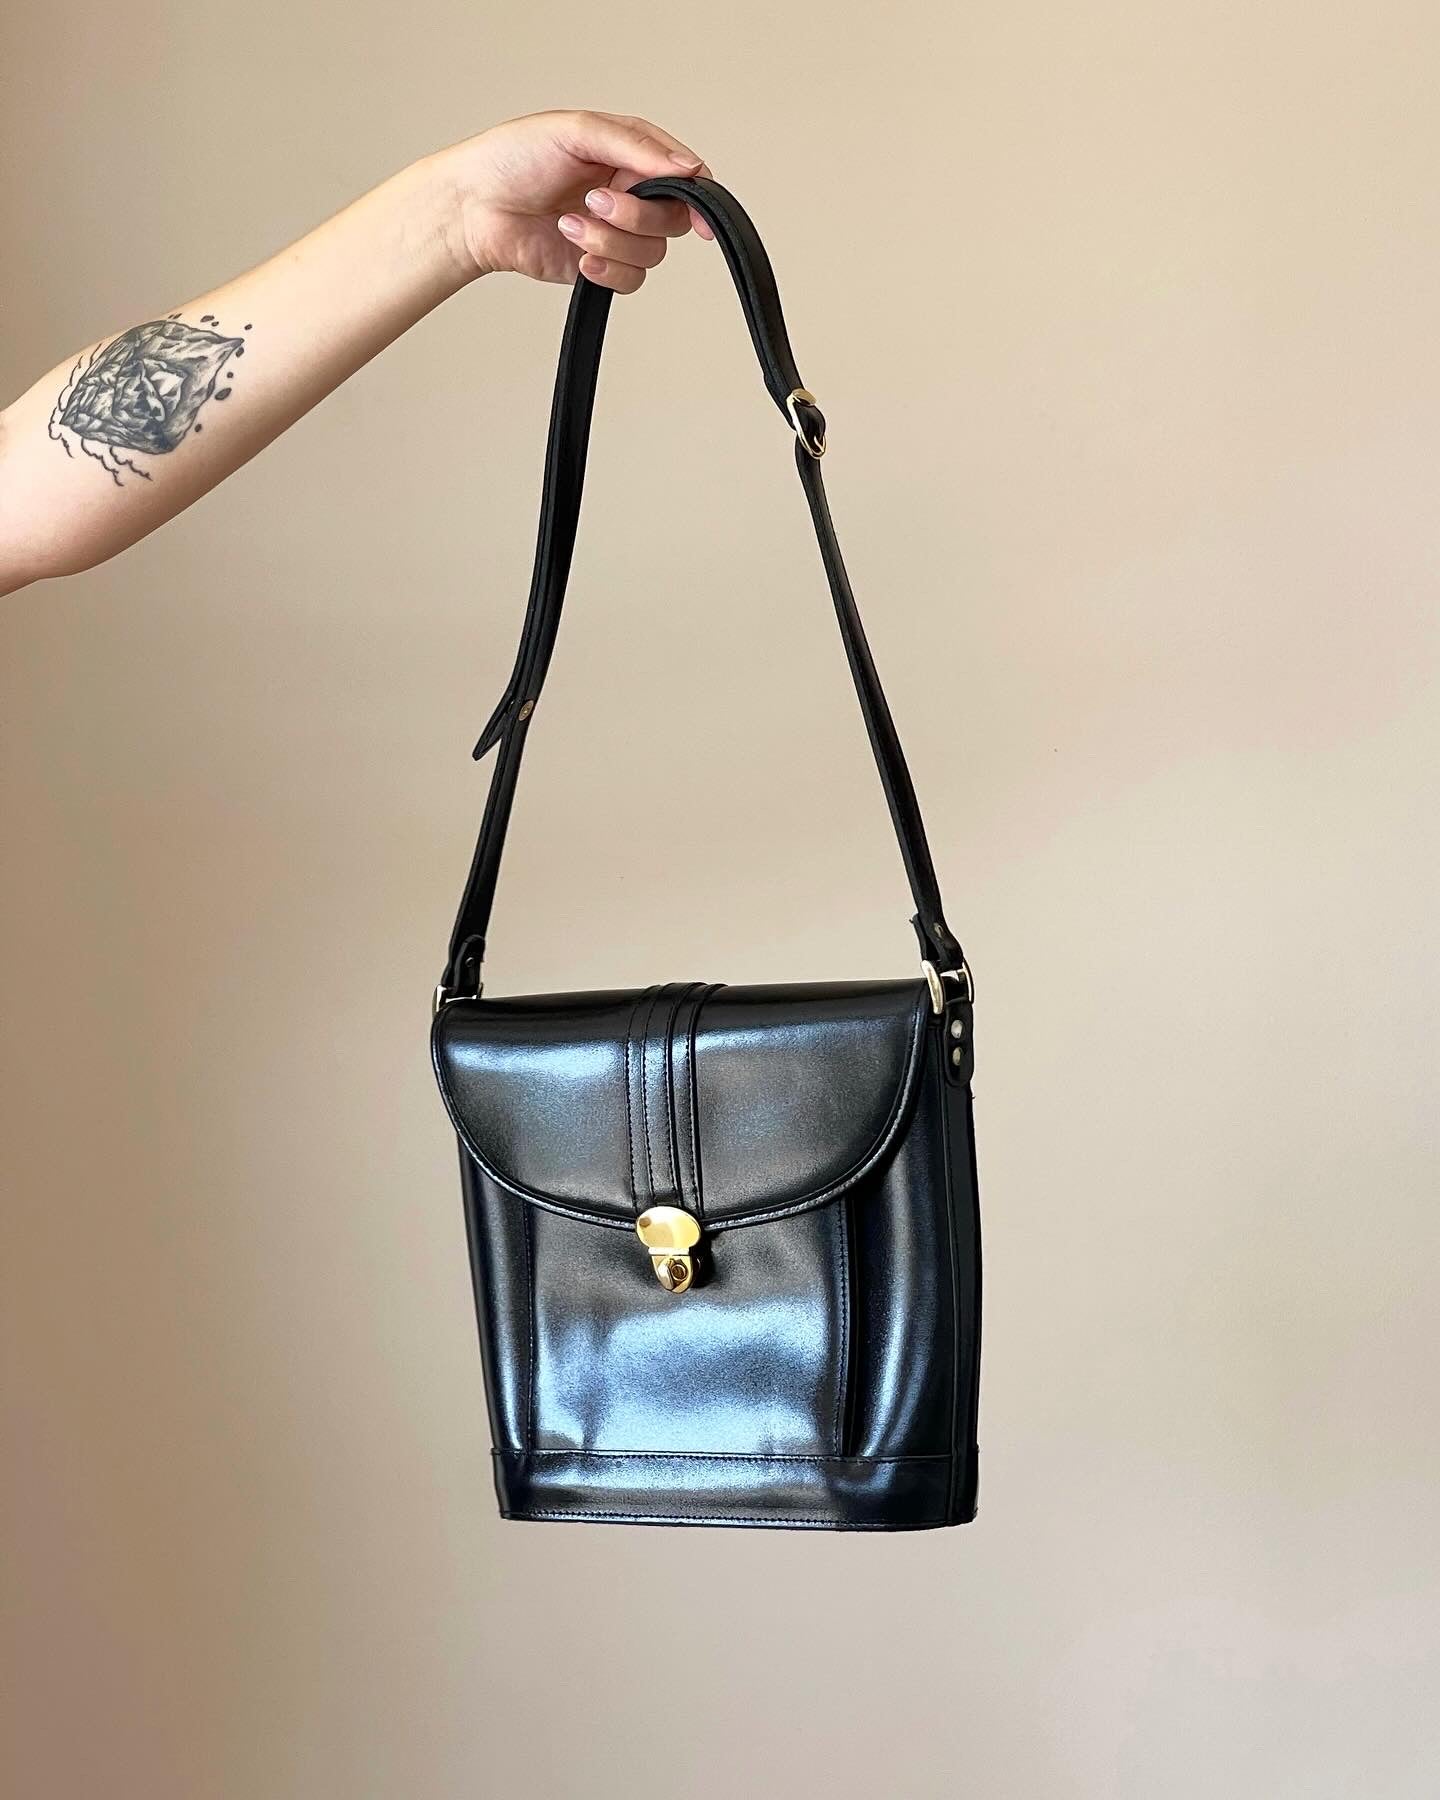 Awesome vintage leather bag